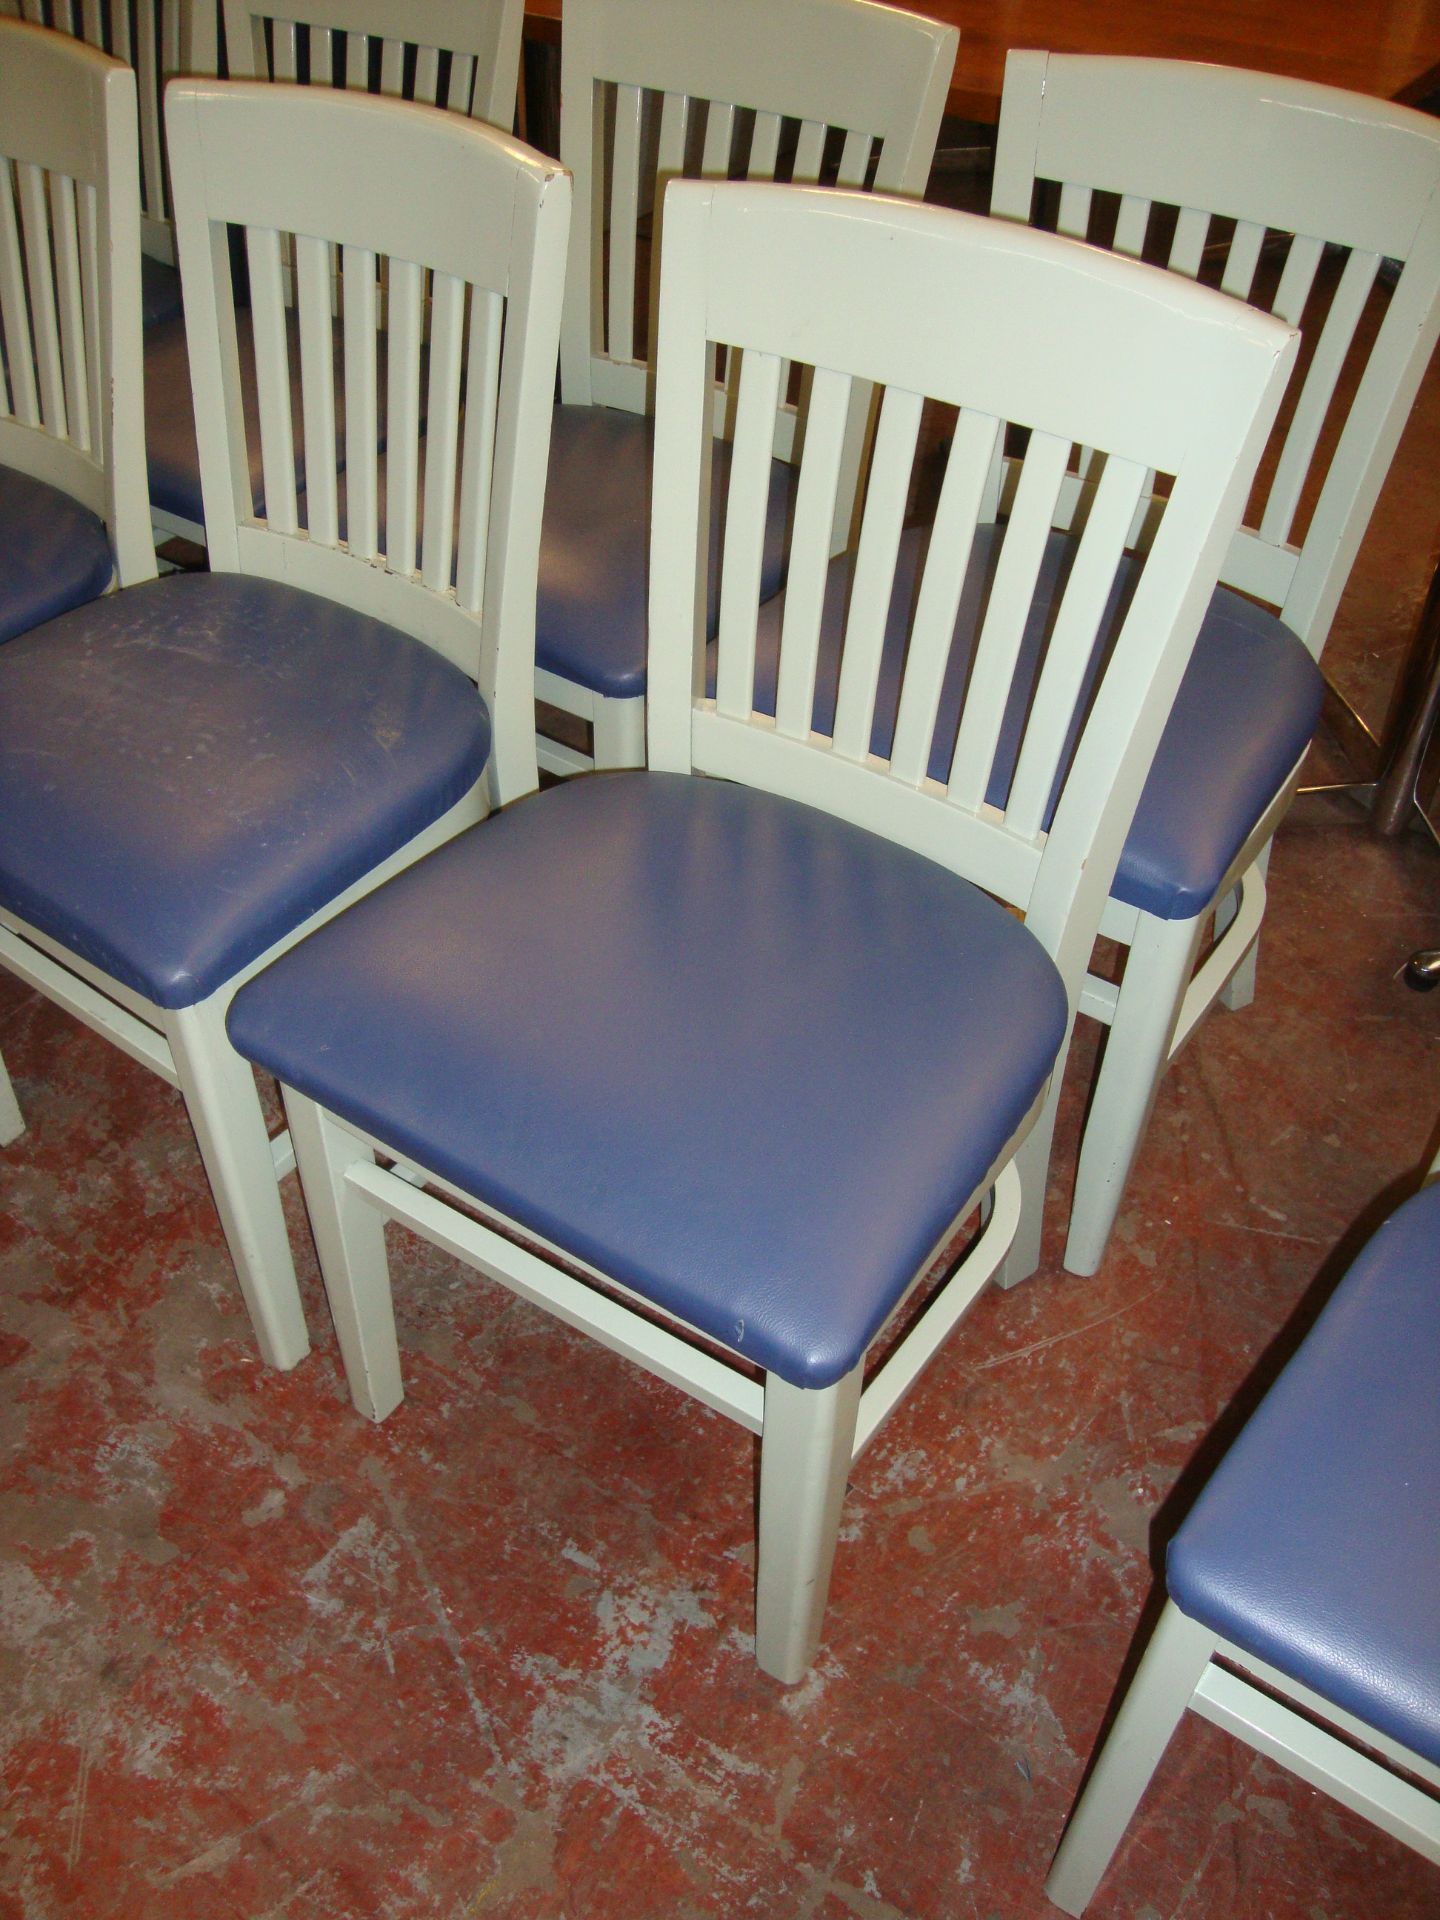 8 off pale green painted wooden chairs with blue upholstered seat bases. NB lots 131 - 137 consist - Image 2 of 3